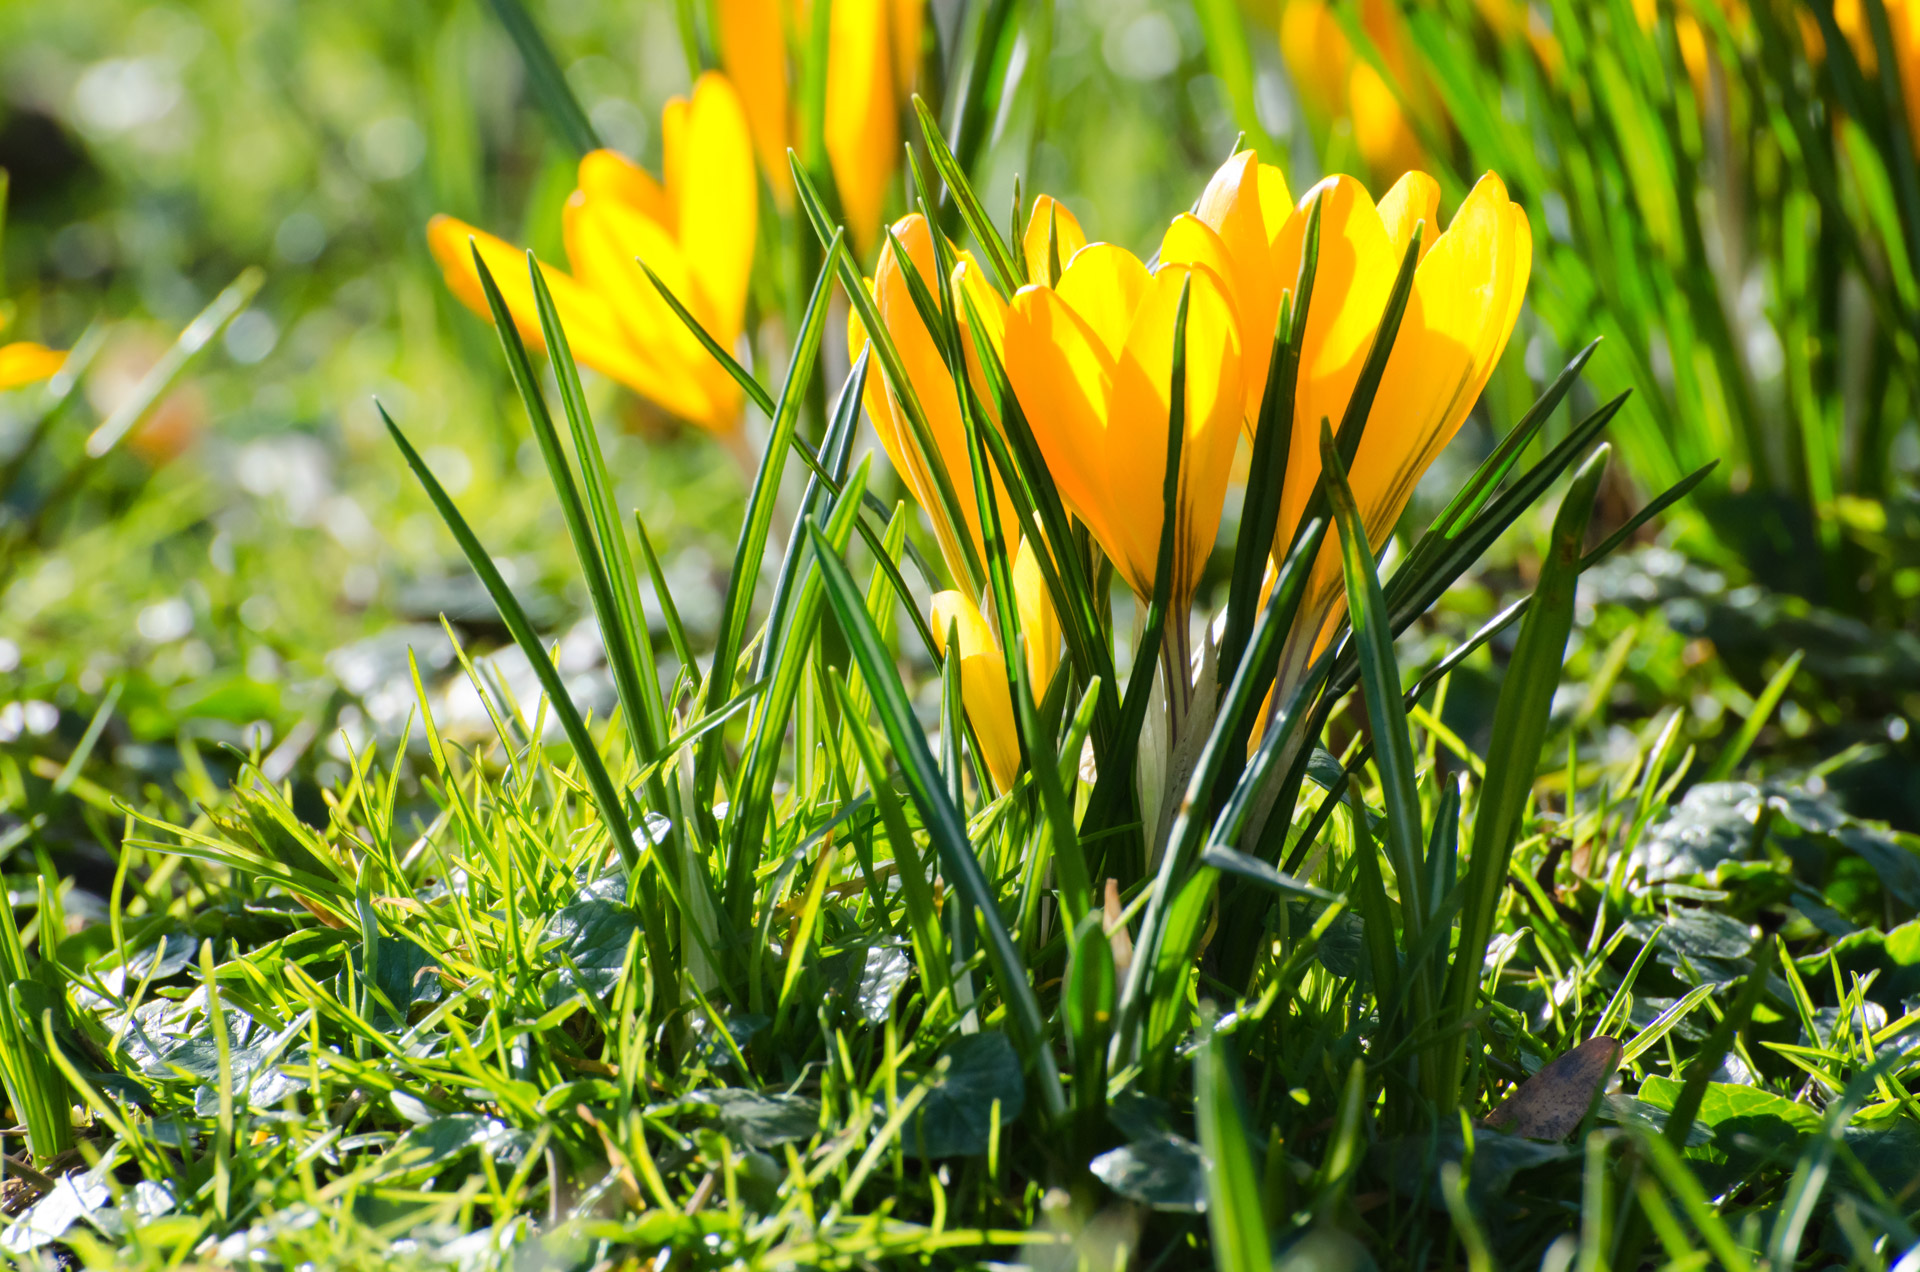 Yellow Spring Flowers